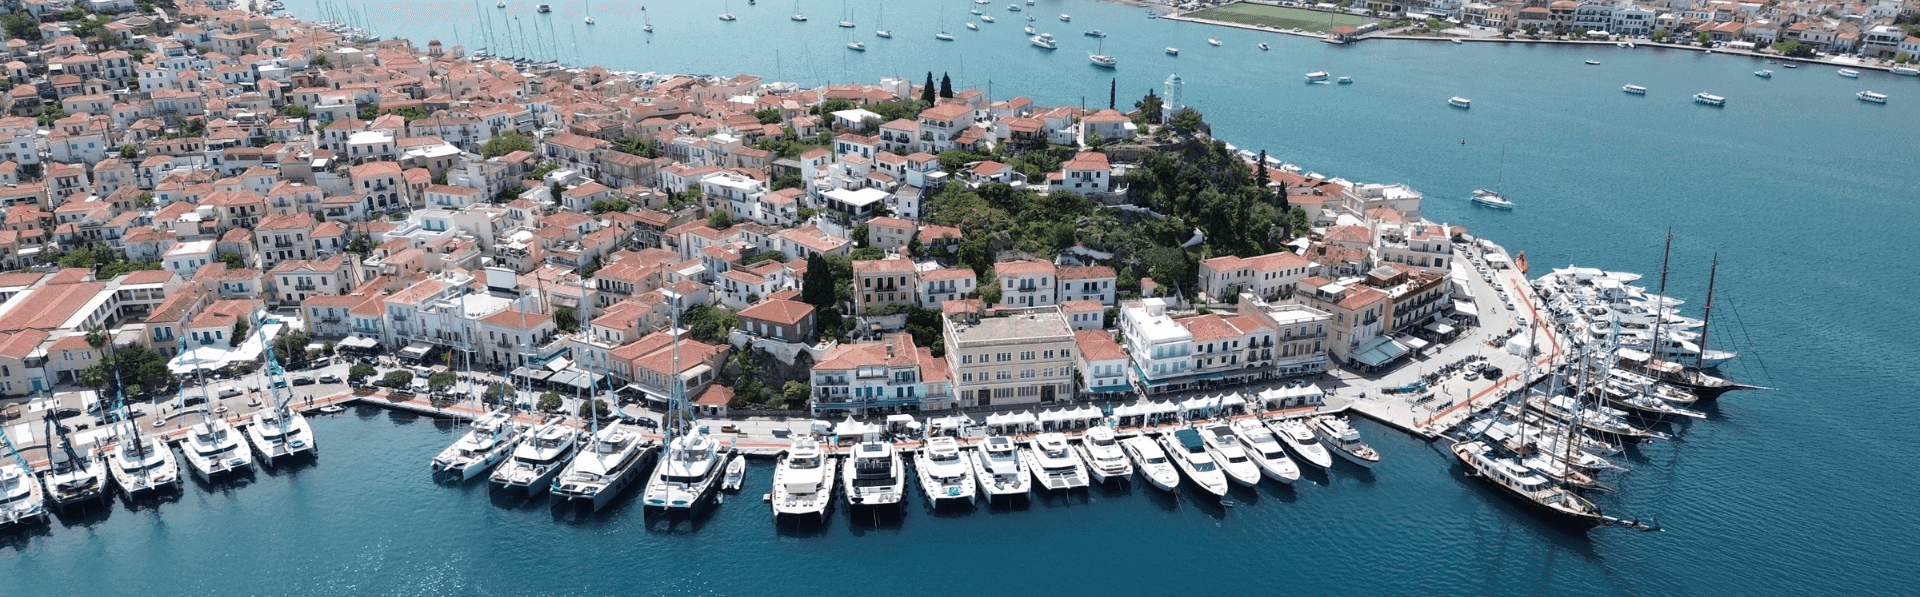 Ritzy Charters Attends Acclaimed Greece EMMYS Charter Show